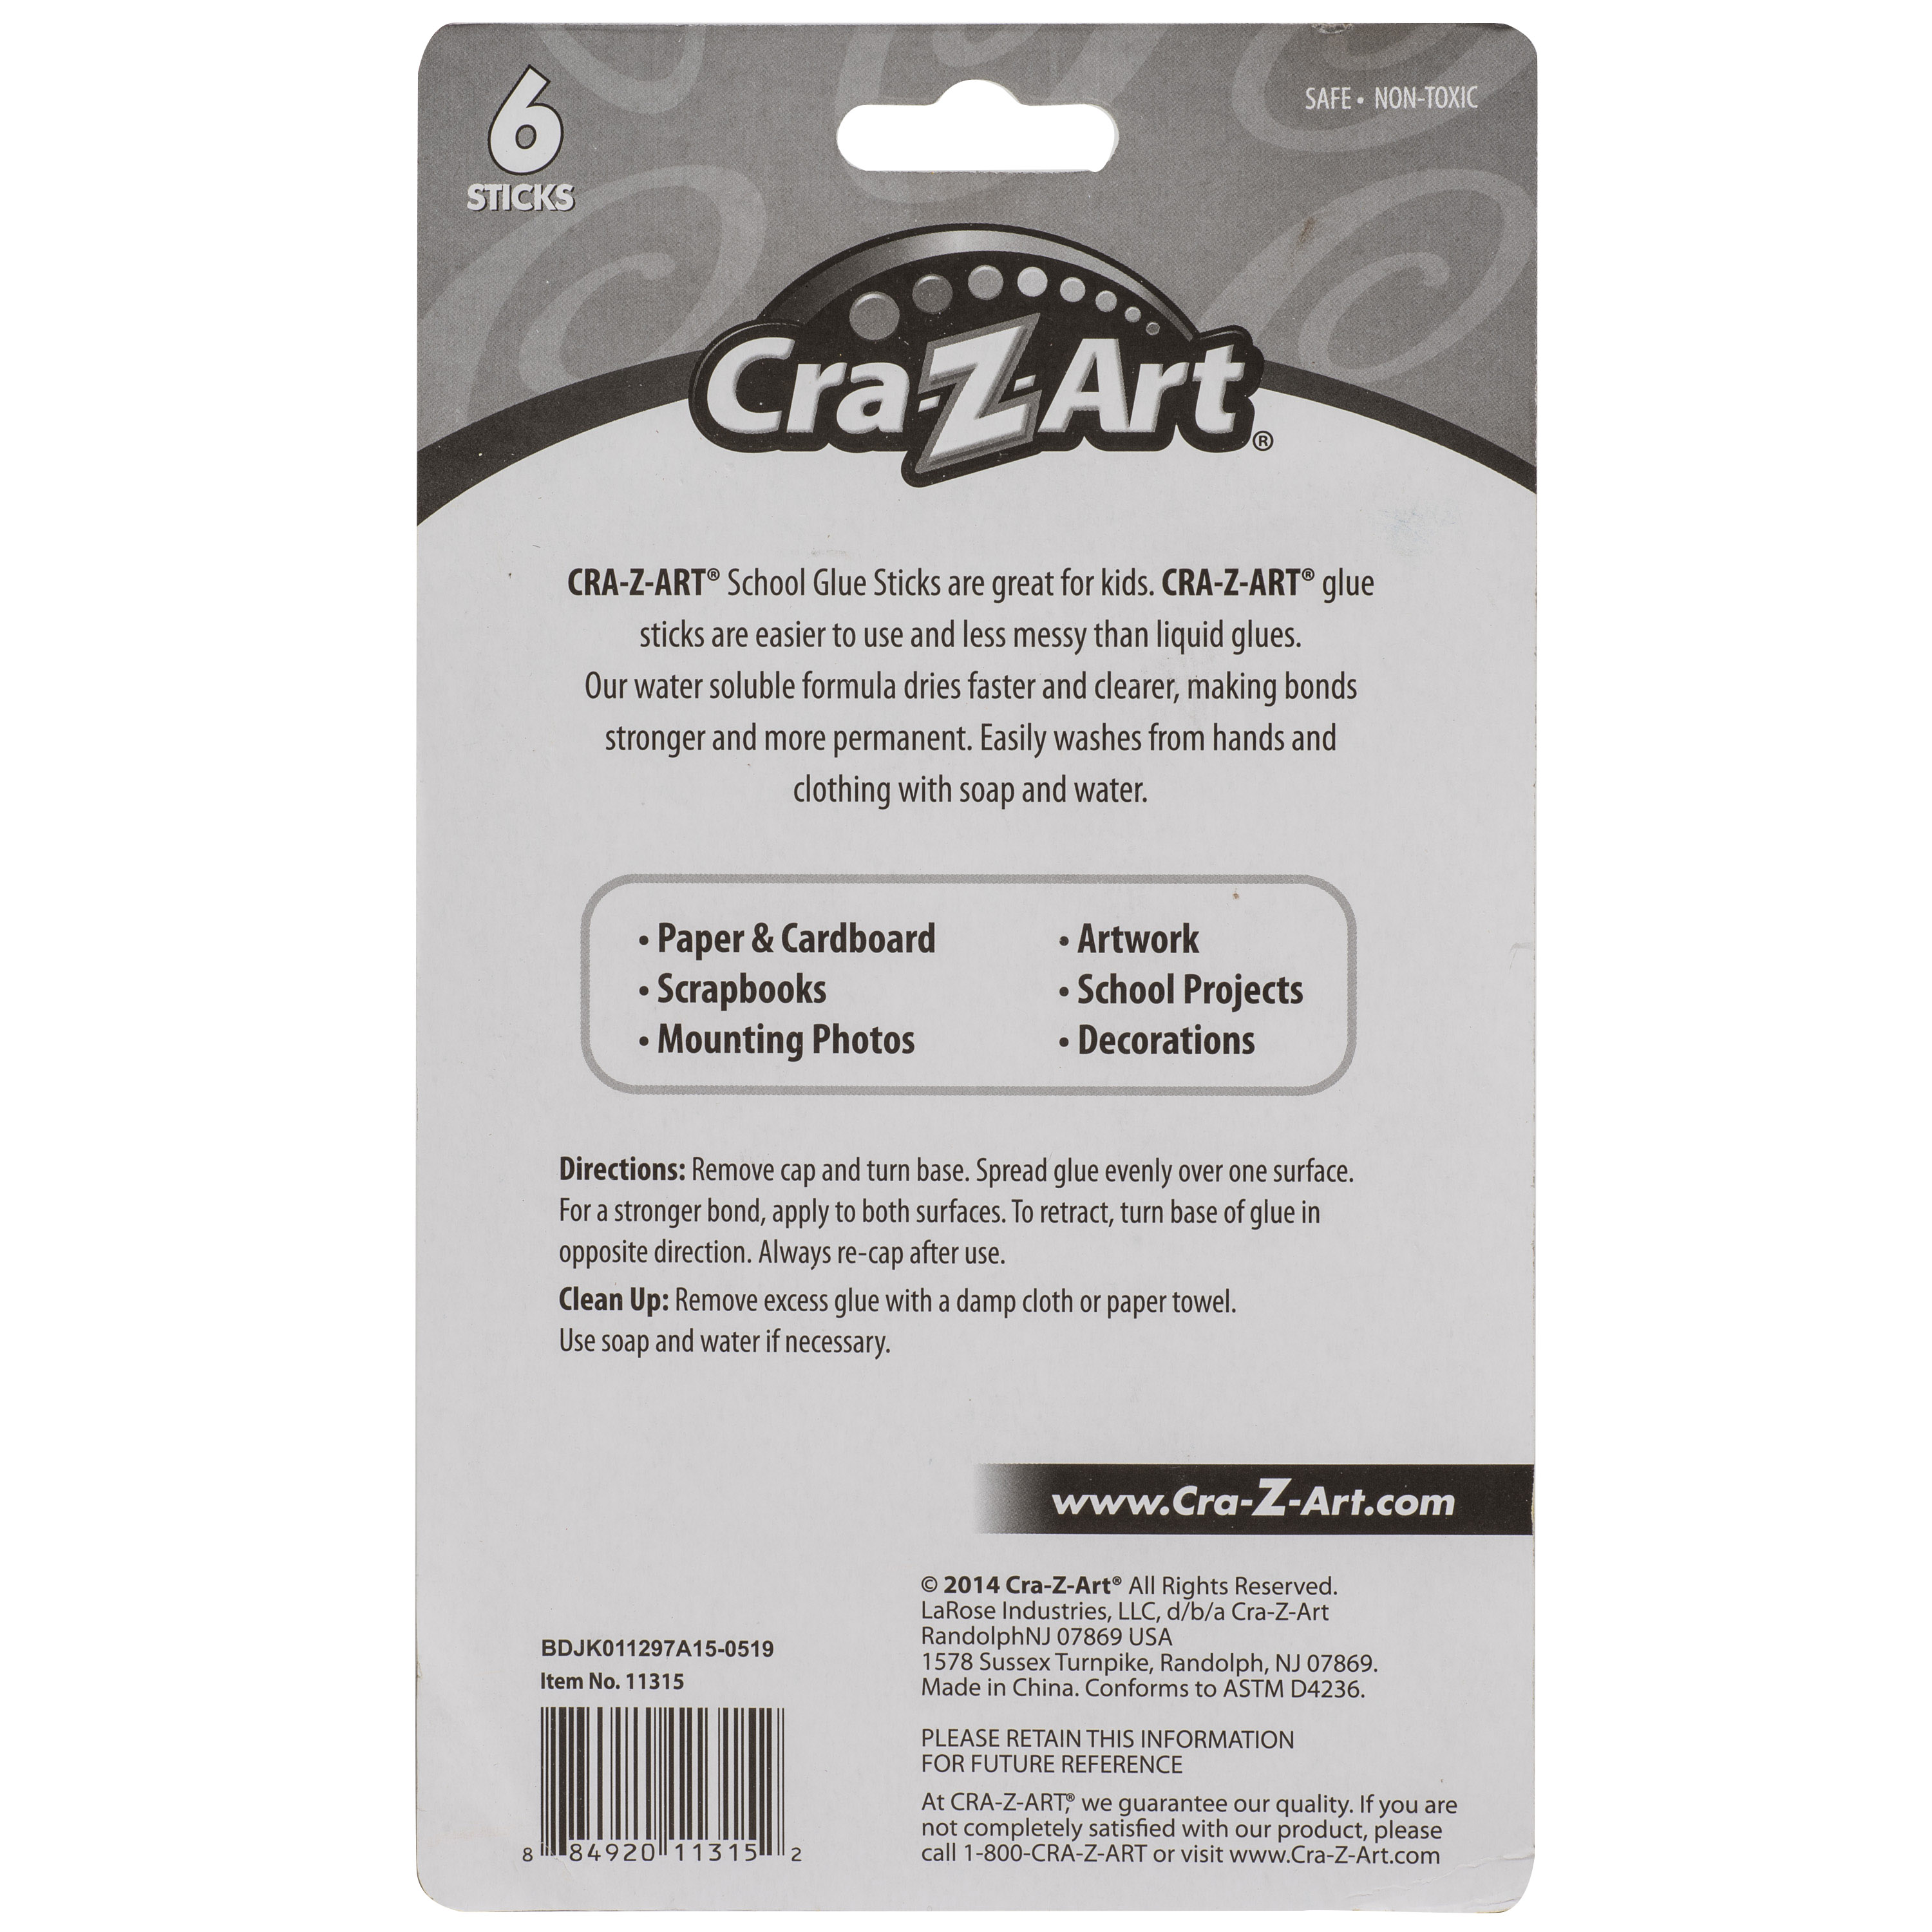 Cra-Z-Art Washable Glue Sticks, Disappearing Purple, 6 Count, Total Weight 1.29oz - image 4 of 9